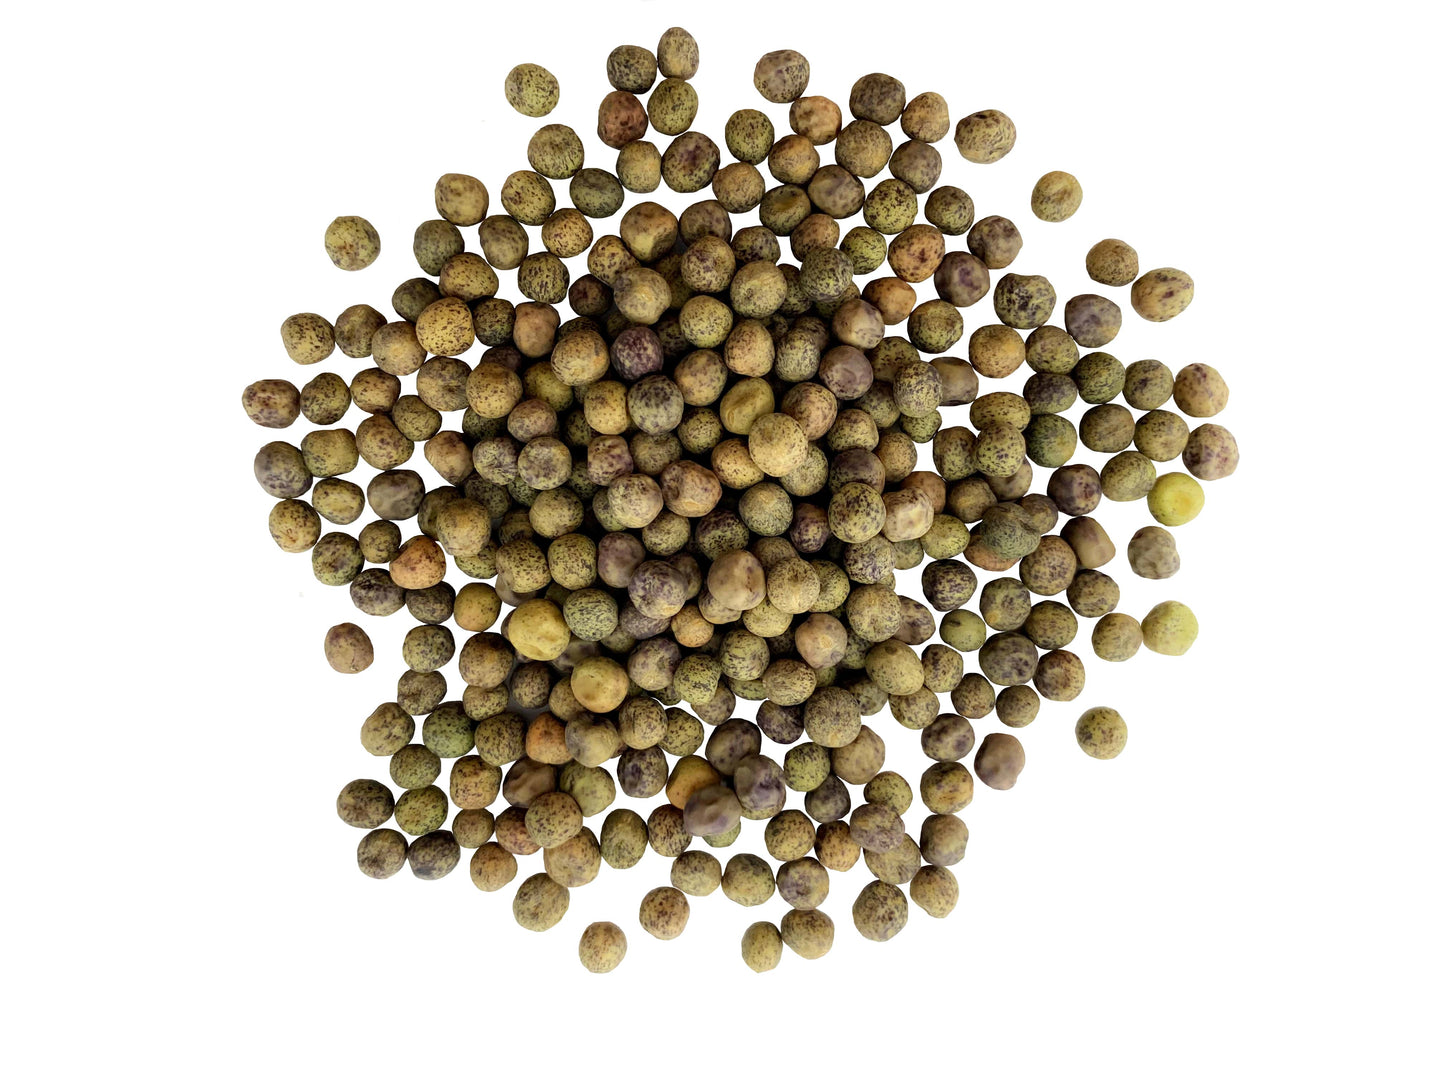 Organic Brown Speckled Peas — Whole, Non-GMO, Sprouting Seeds, Kosher, Raw, Dried, Vegan, Bulk, Product of Canada - by Food to Live